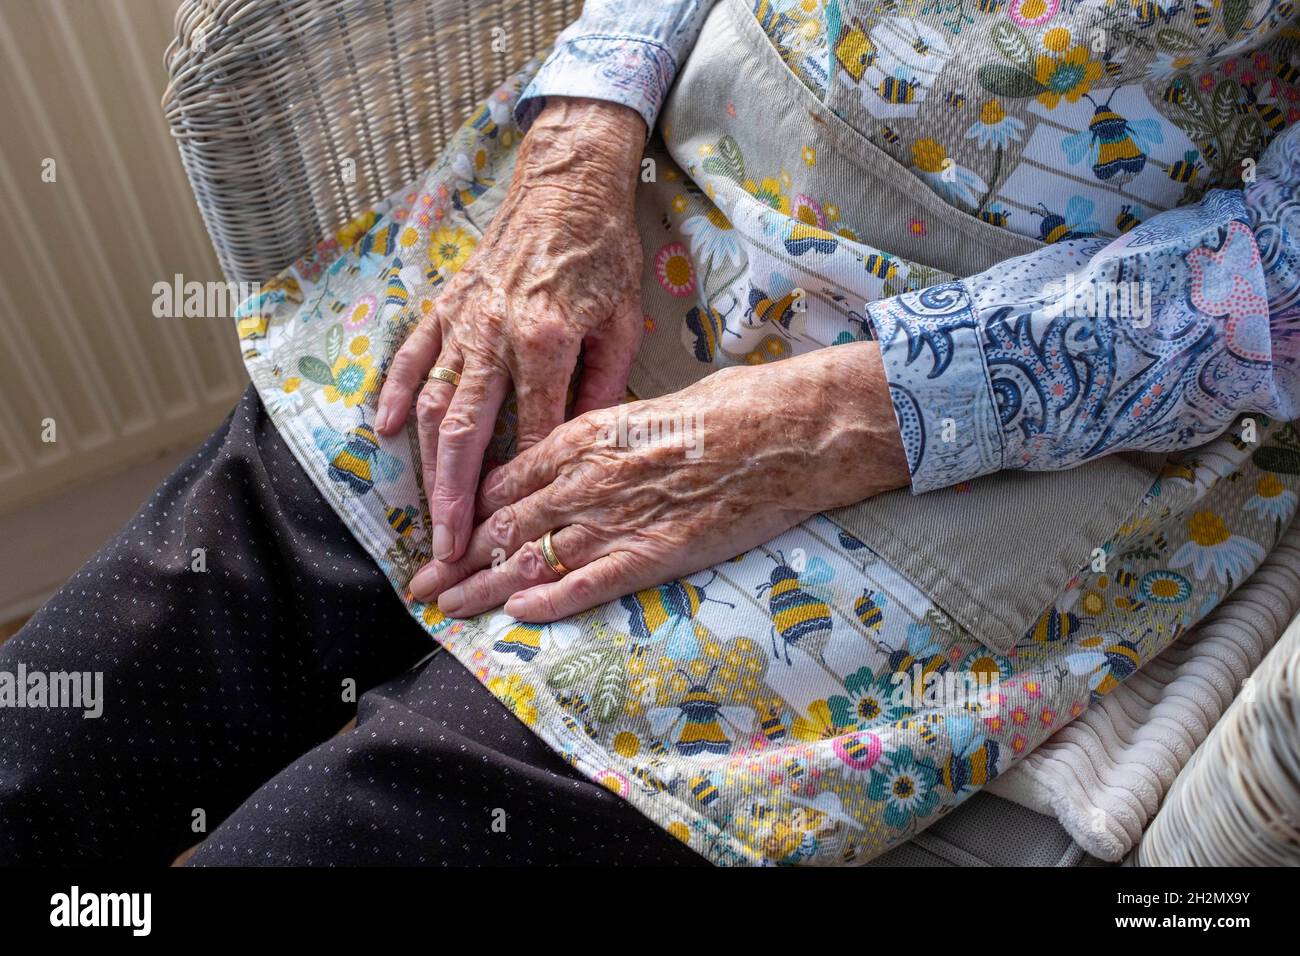 Elderly woman in her 80s holding her hands on her lap UK Stock Photo